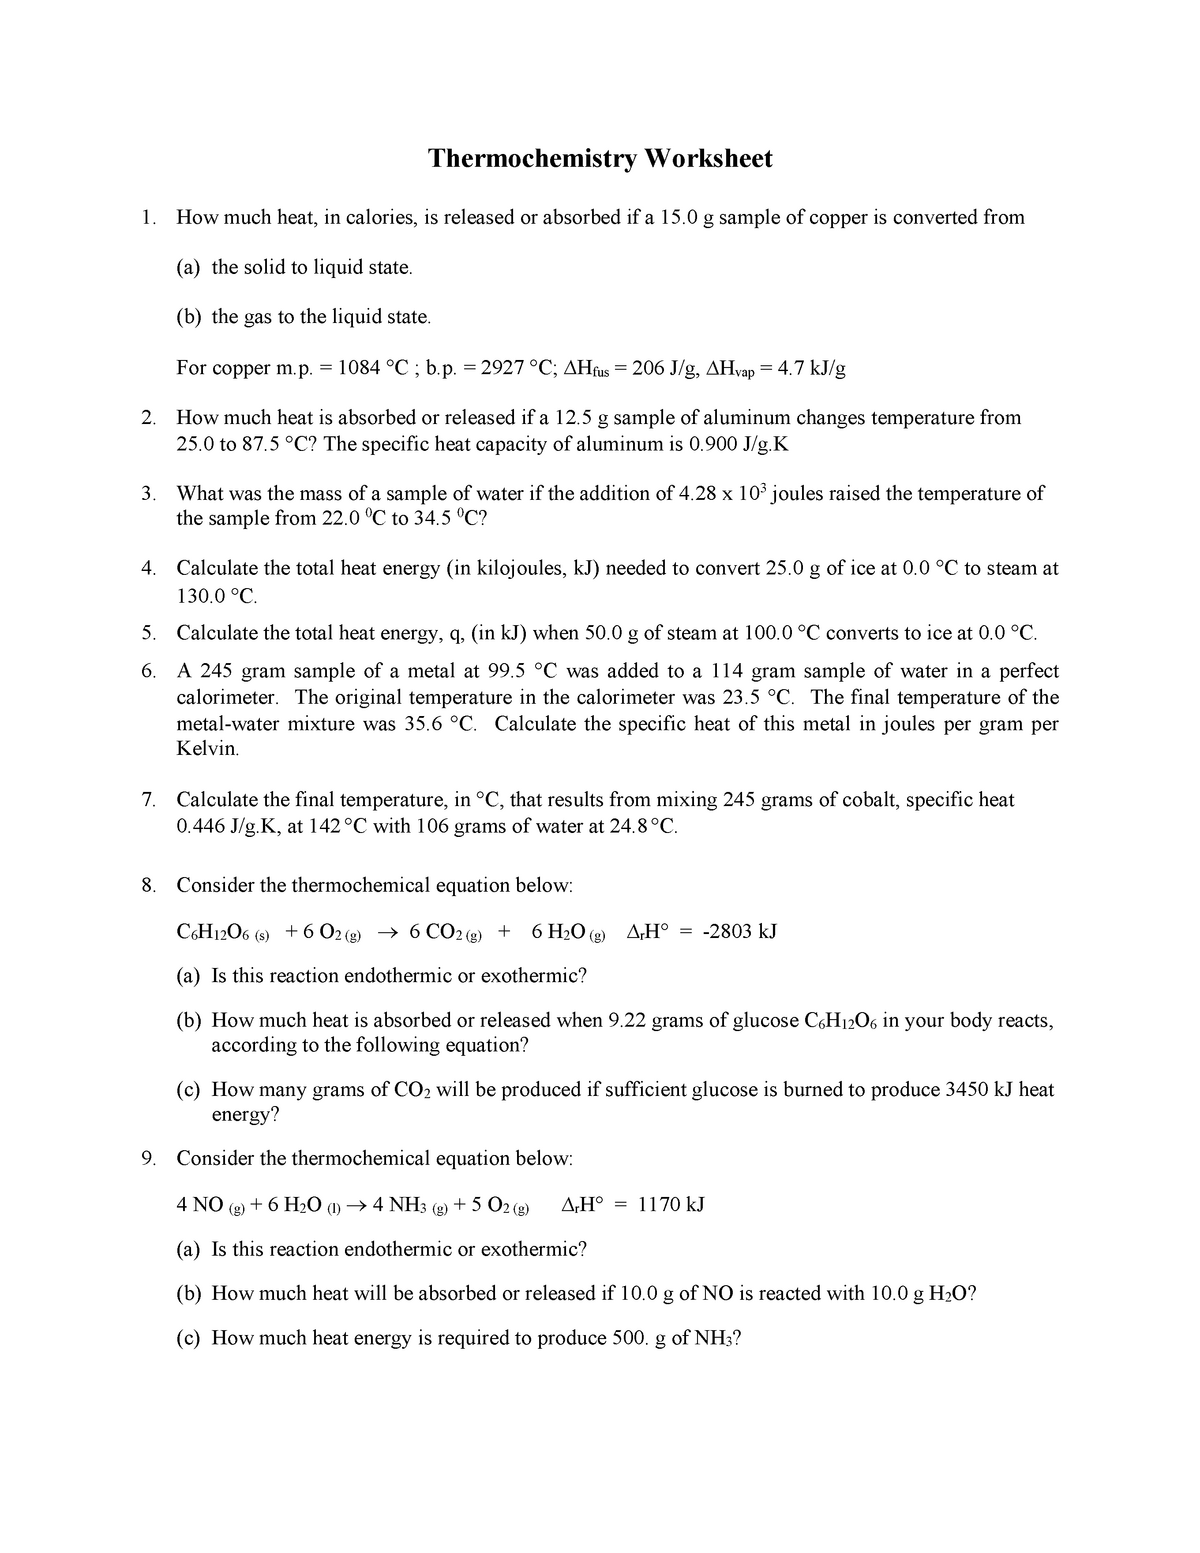 141-thermochemistry-worksheet-thermochemistry-worksheet-how-much-heat-in-calories-is